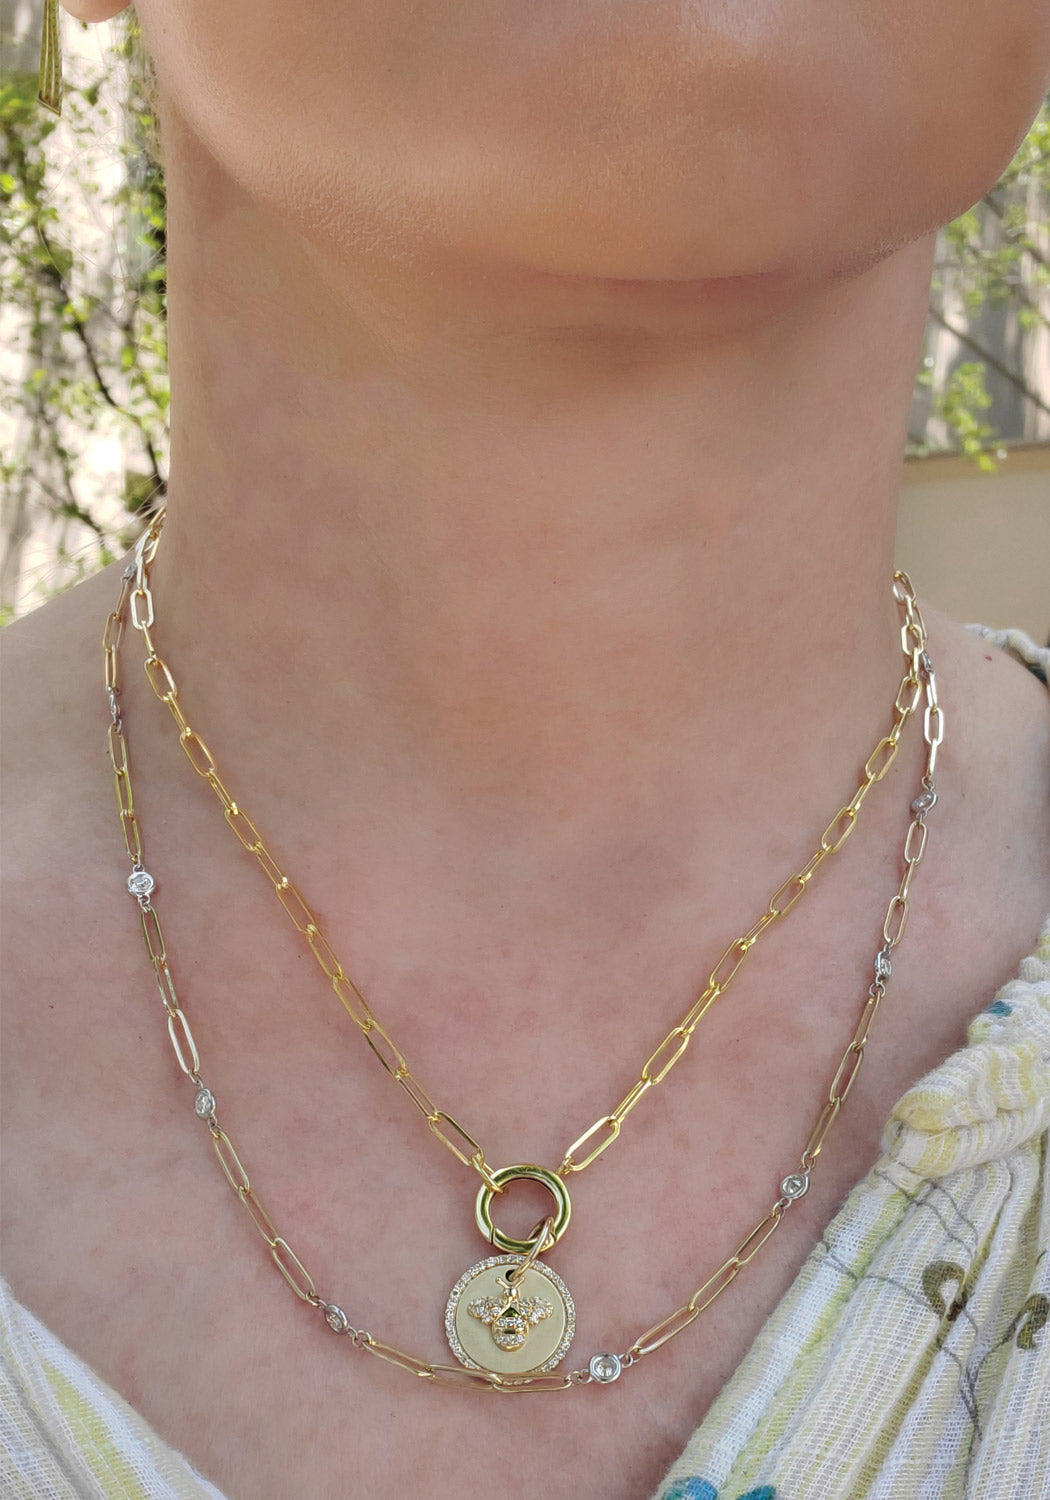 Diamond & Gold Bee Coin Necklace at Osterjewelers.com |  Chain necklaces sold separately